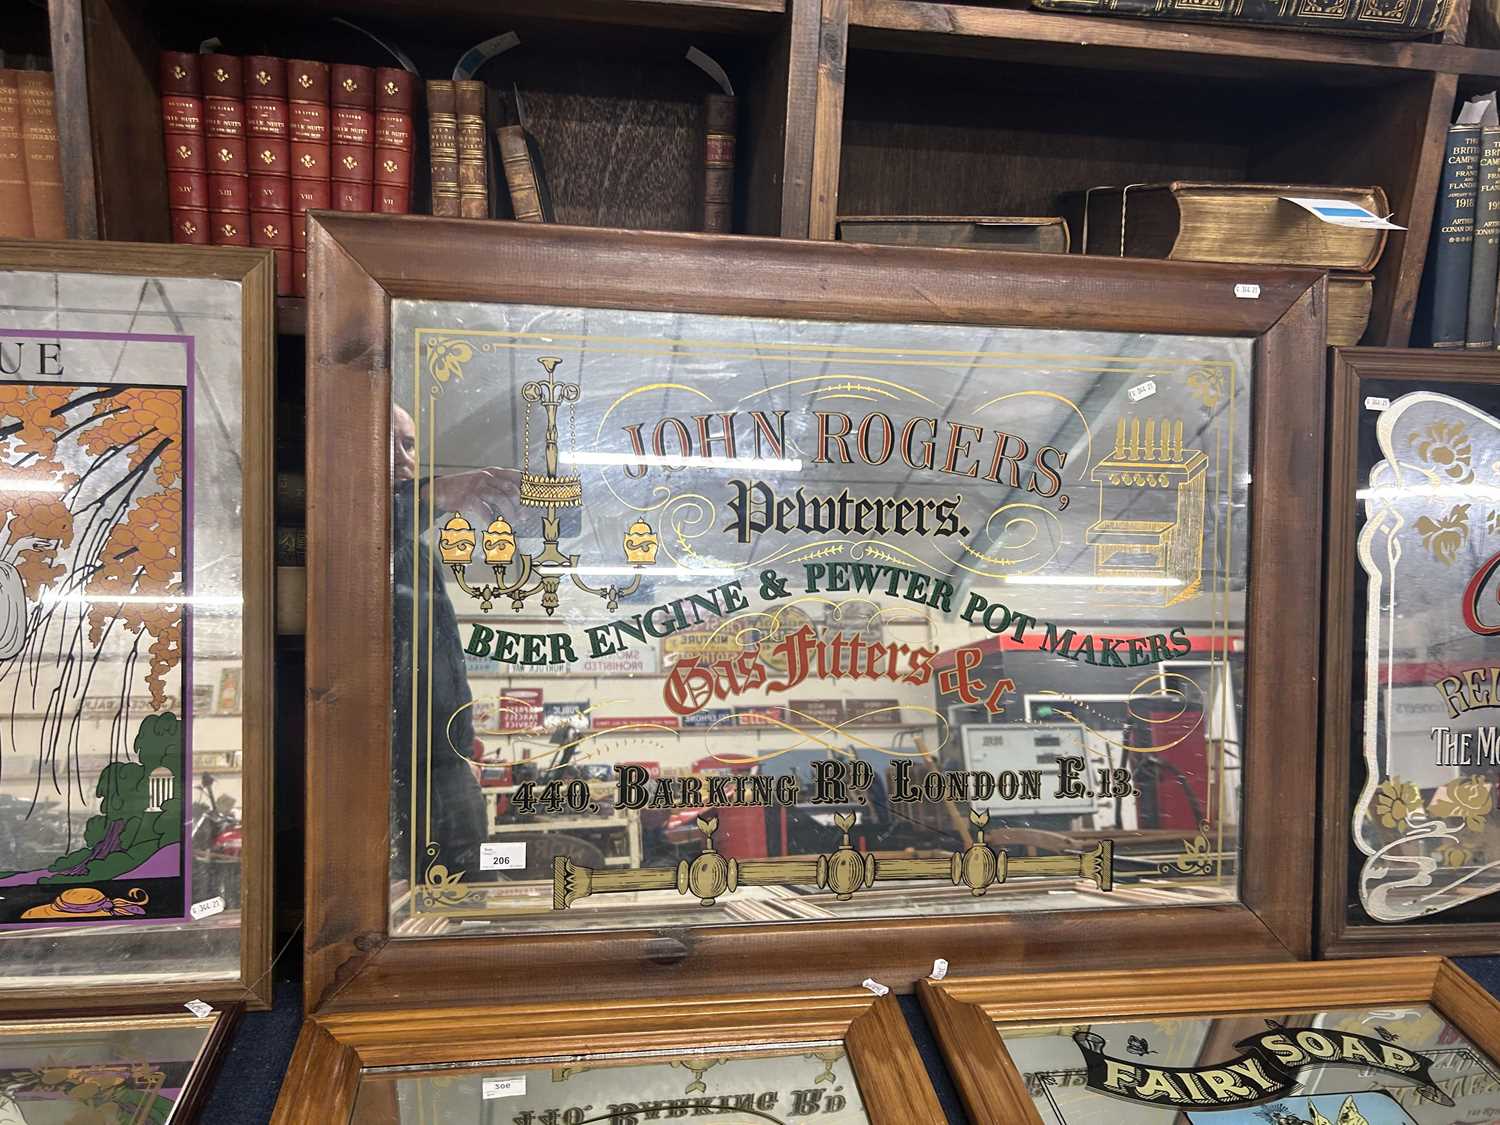 John Rogers Pewterers, 440 Barking Road, London, picture sign in stained pine frame